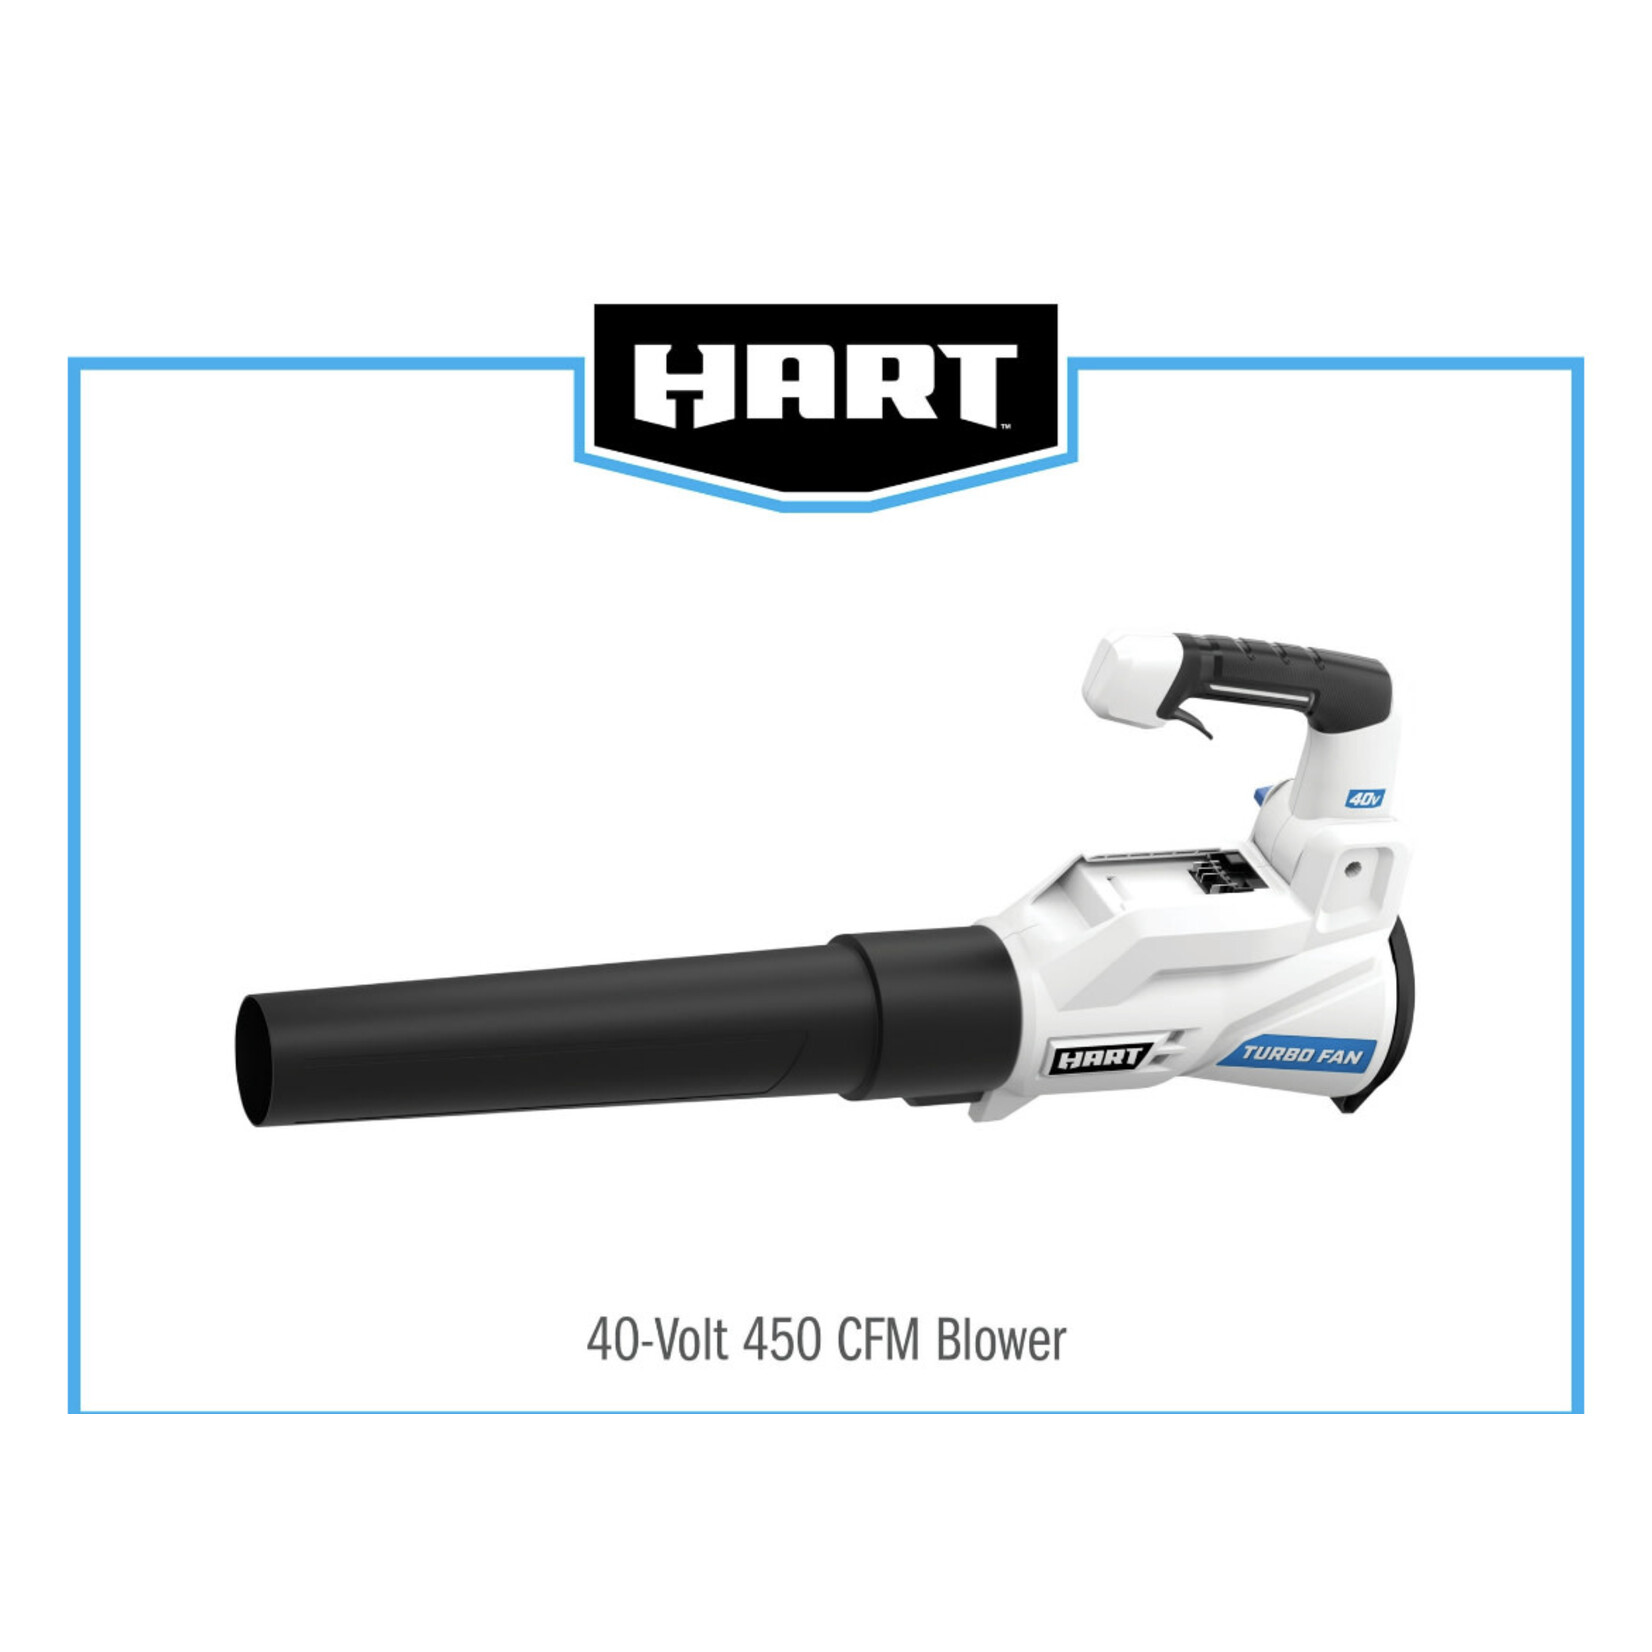 Discount Central Hart 40v blower - tool only